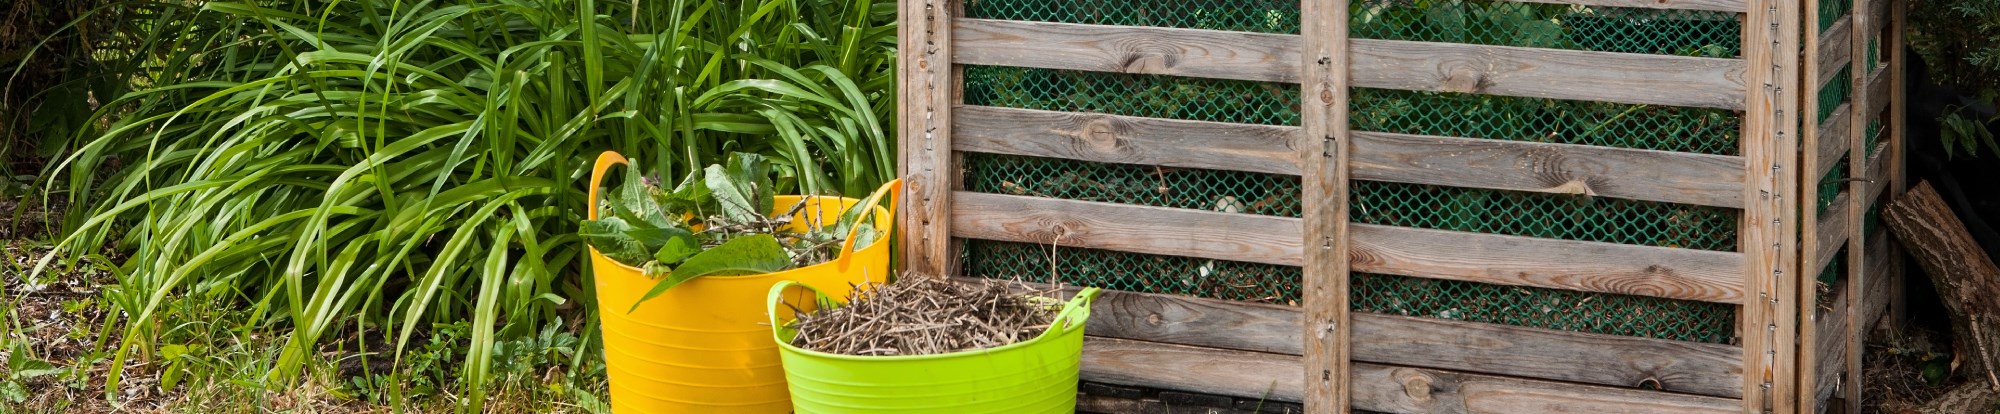 Composters and Garden Bins